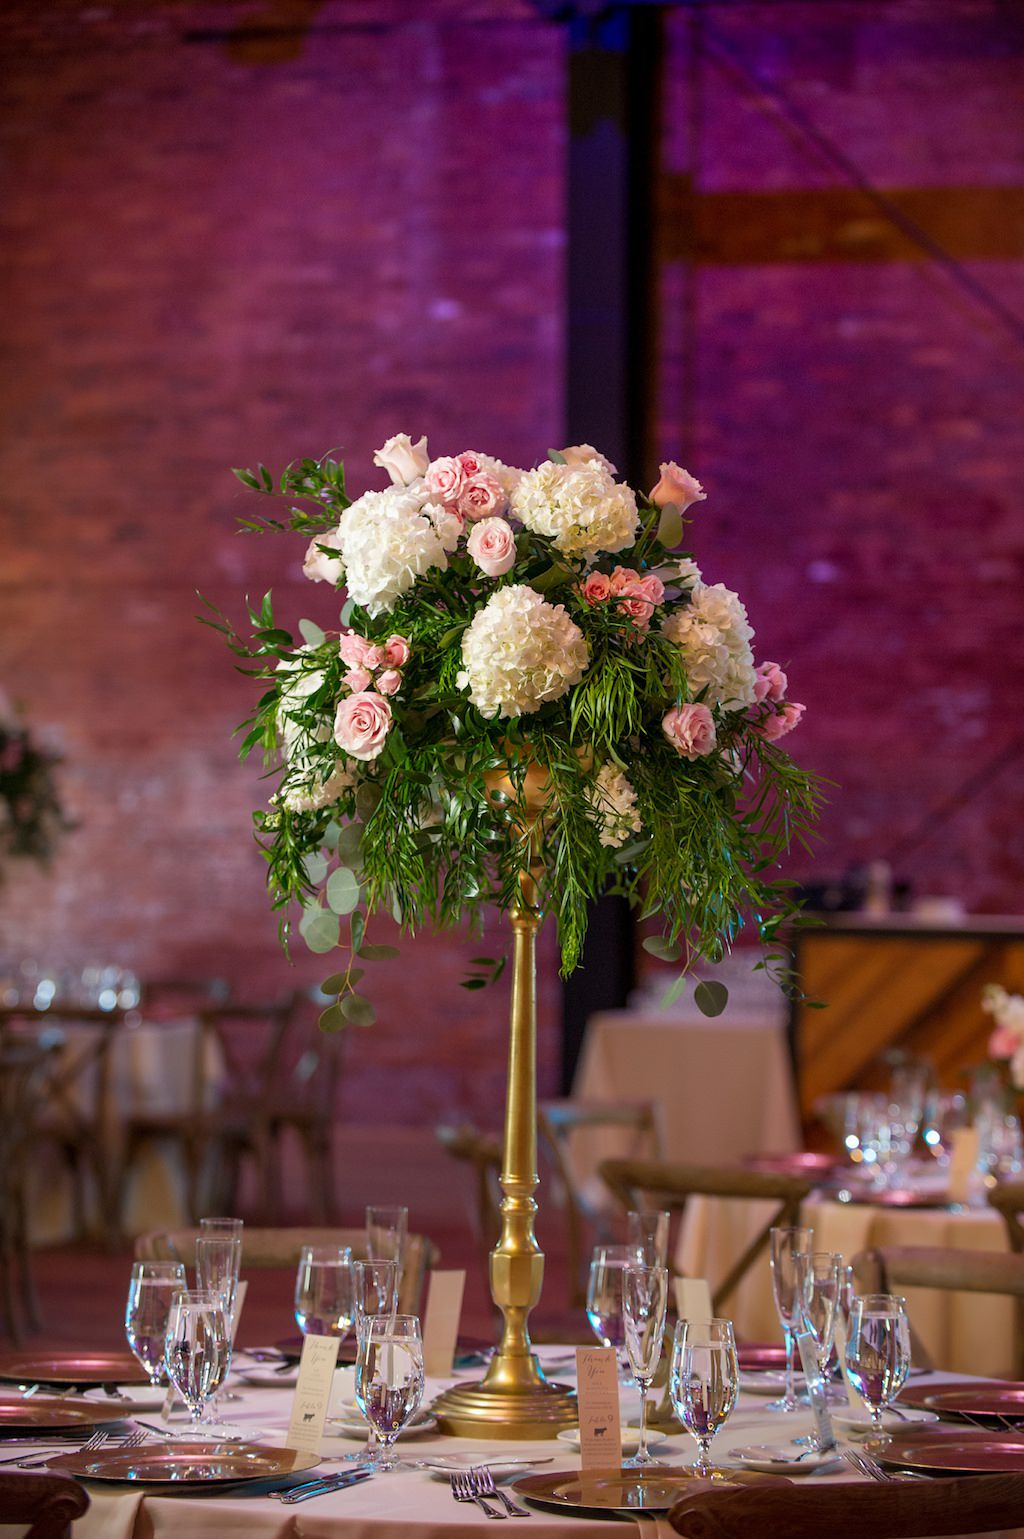 Industrial Chic Wedding Reception with Round Tables with Wooden Cross Back Chairs, Extra Tall White and Pink Rose Centerpieces in Gold Vases, Purple Uplighting and Blush and Ivory Linens | Exposed Brick Downtown Tampa Wedding Venue Armature Works